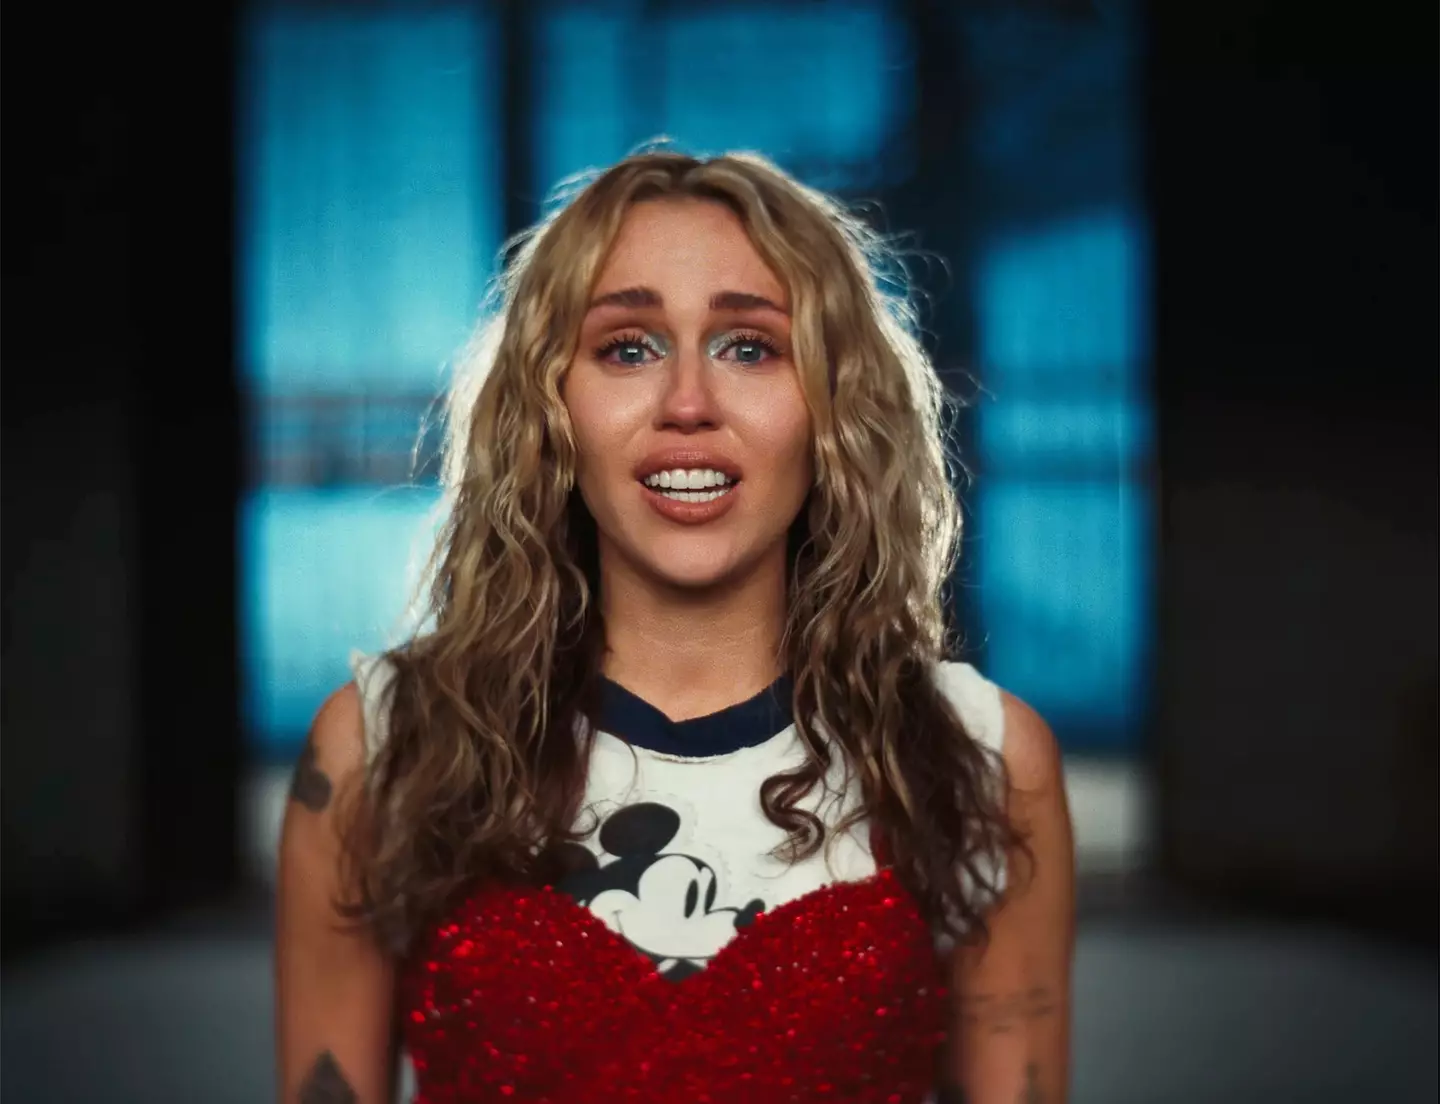 Miley cries in her 'Used to Be Young' video.